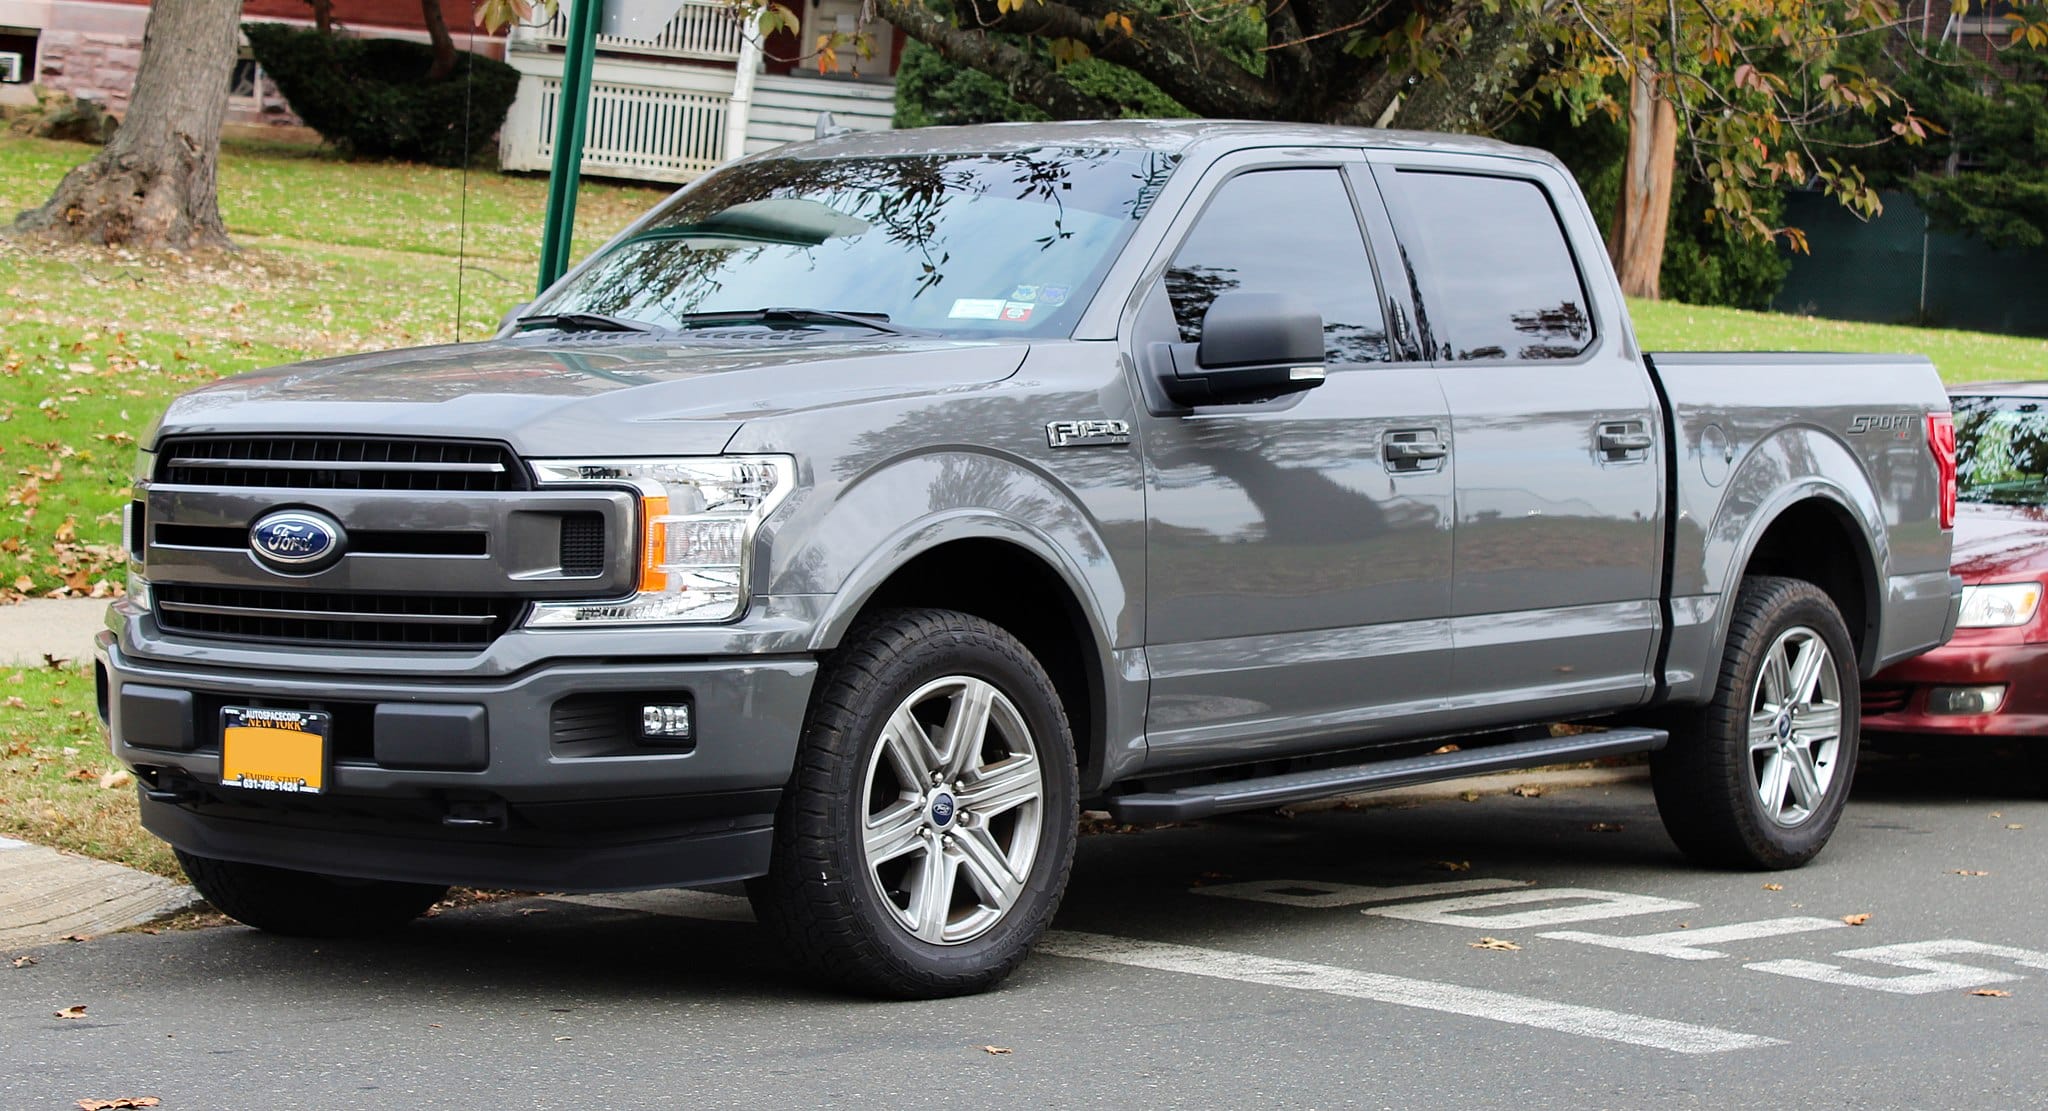 If the Mac were a truck, it would be a shiny pickup truck you want to drive everywhere.